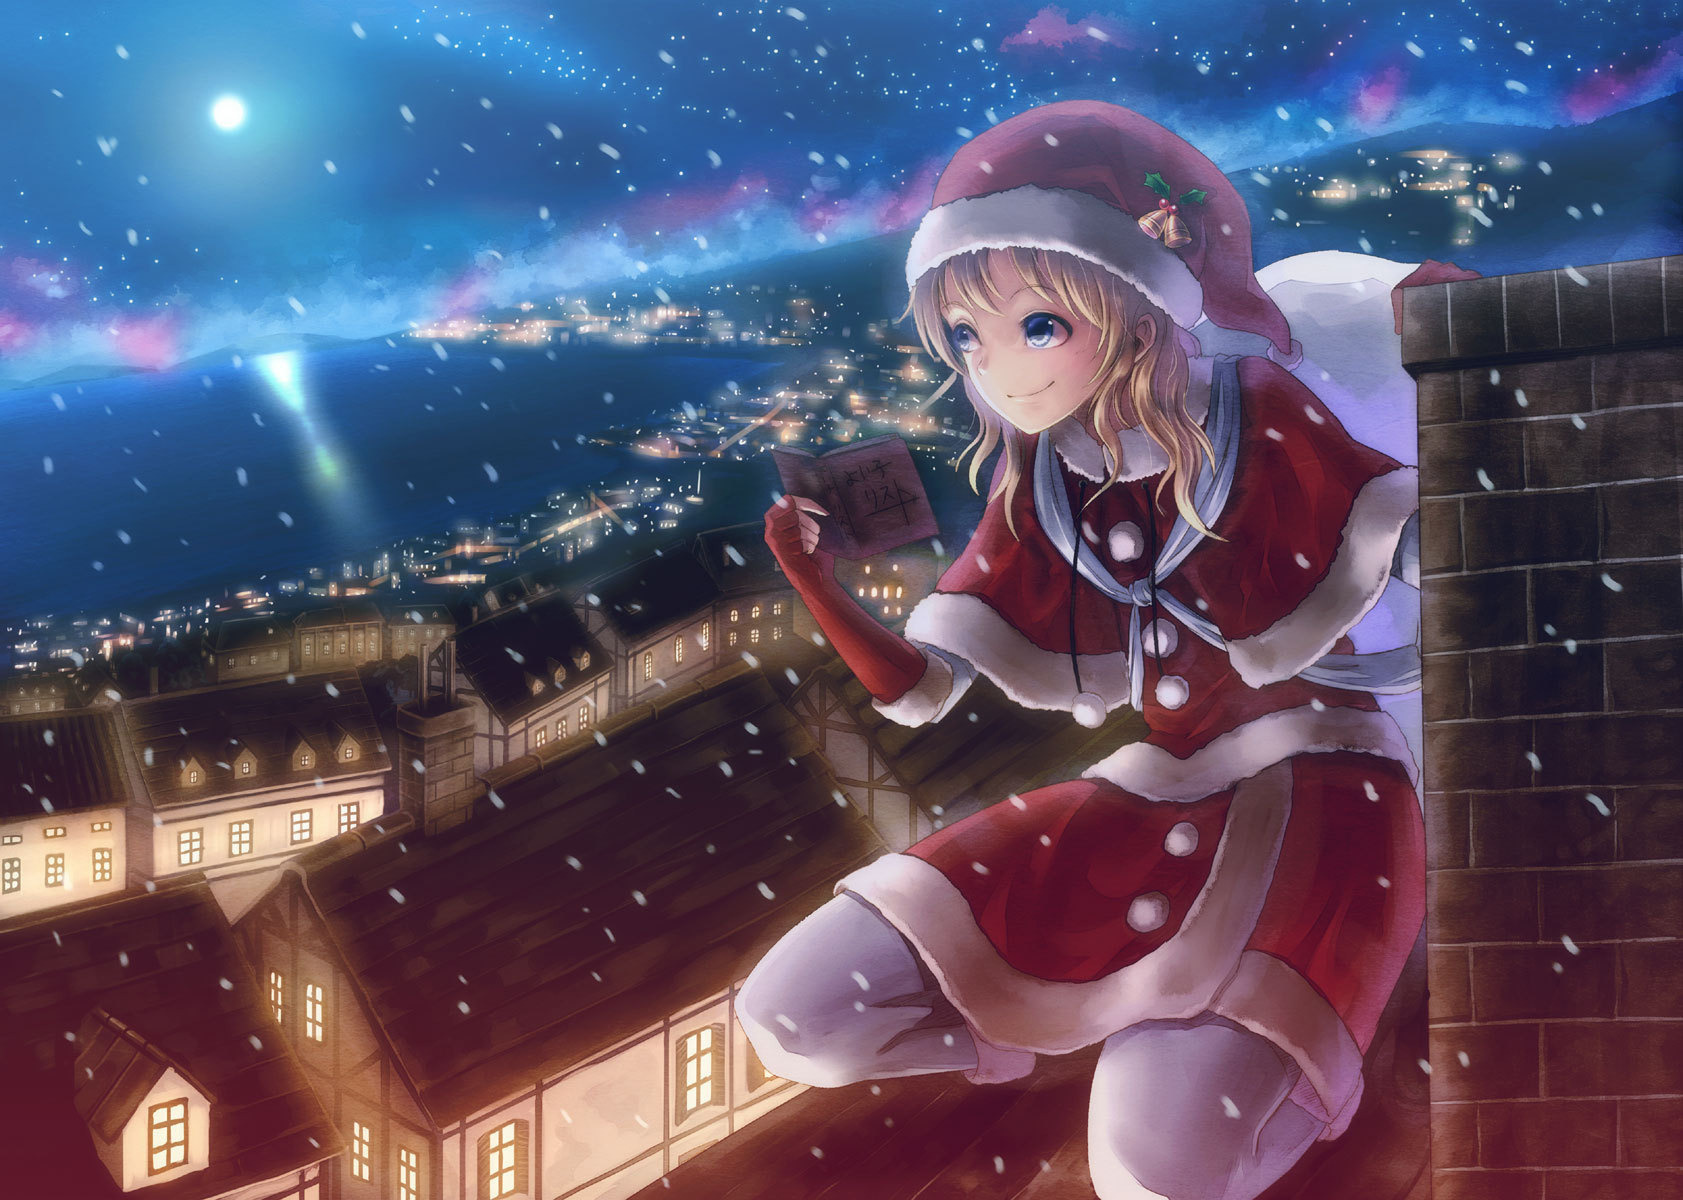 Wallpaper. Anime. photo. picture. night, holiday, New year, roof, pipe